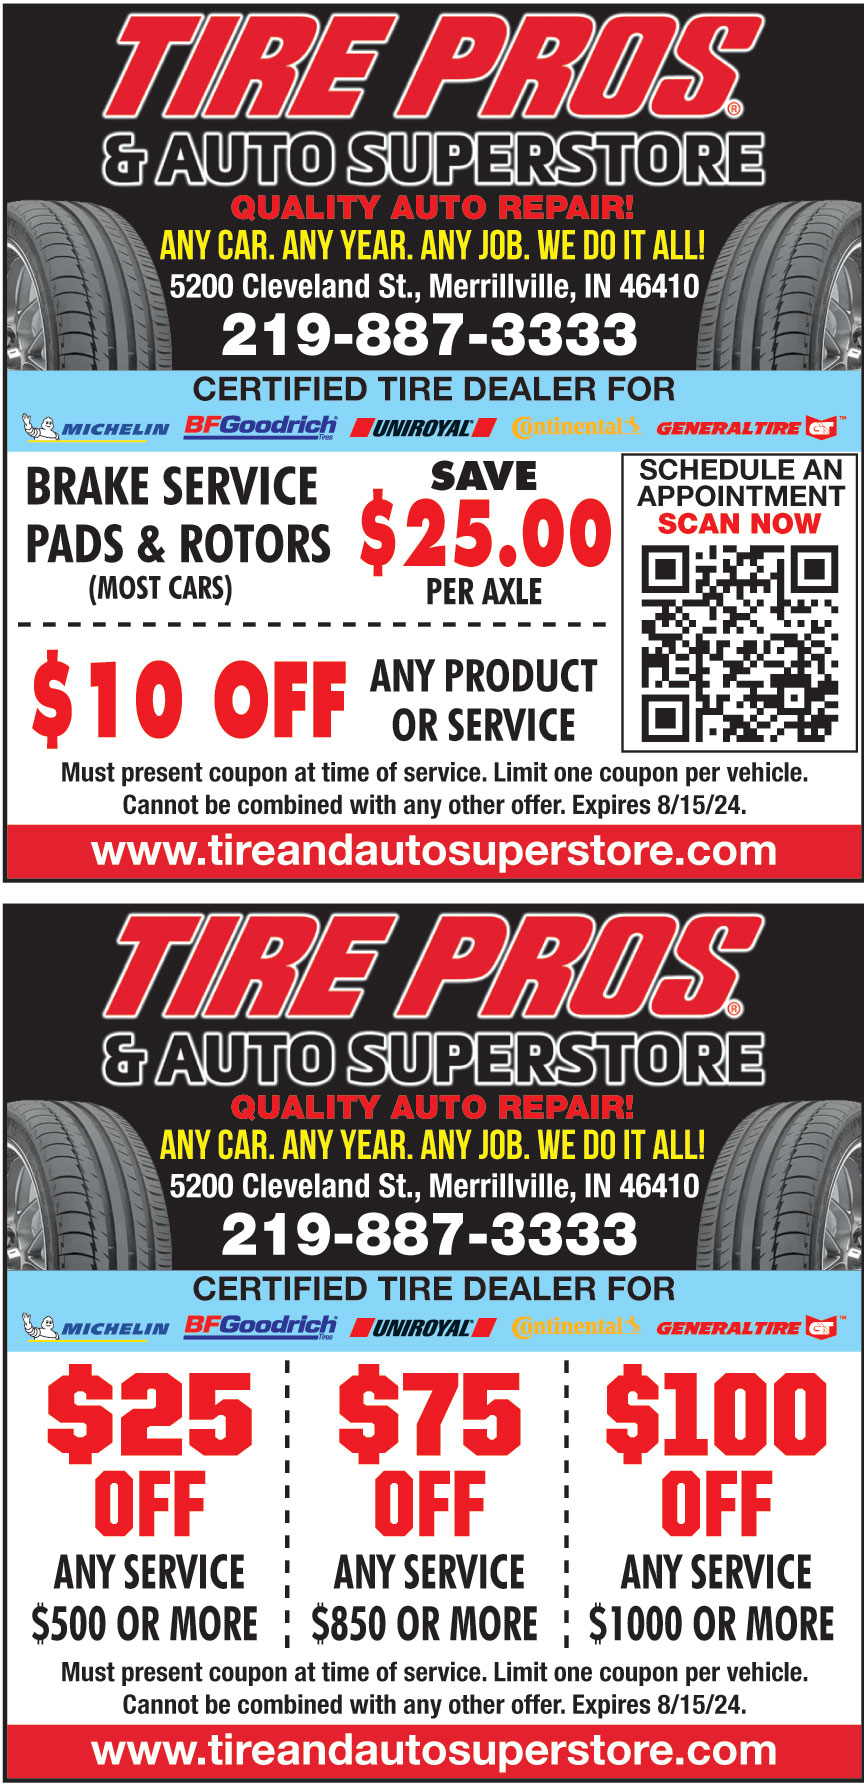 TIRE PROS AND AUTO SUPERS